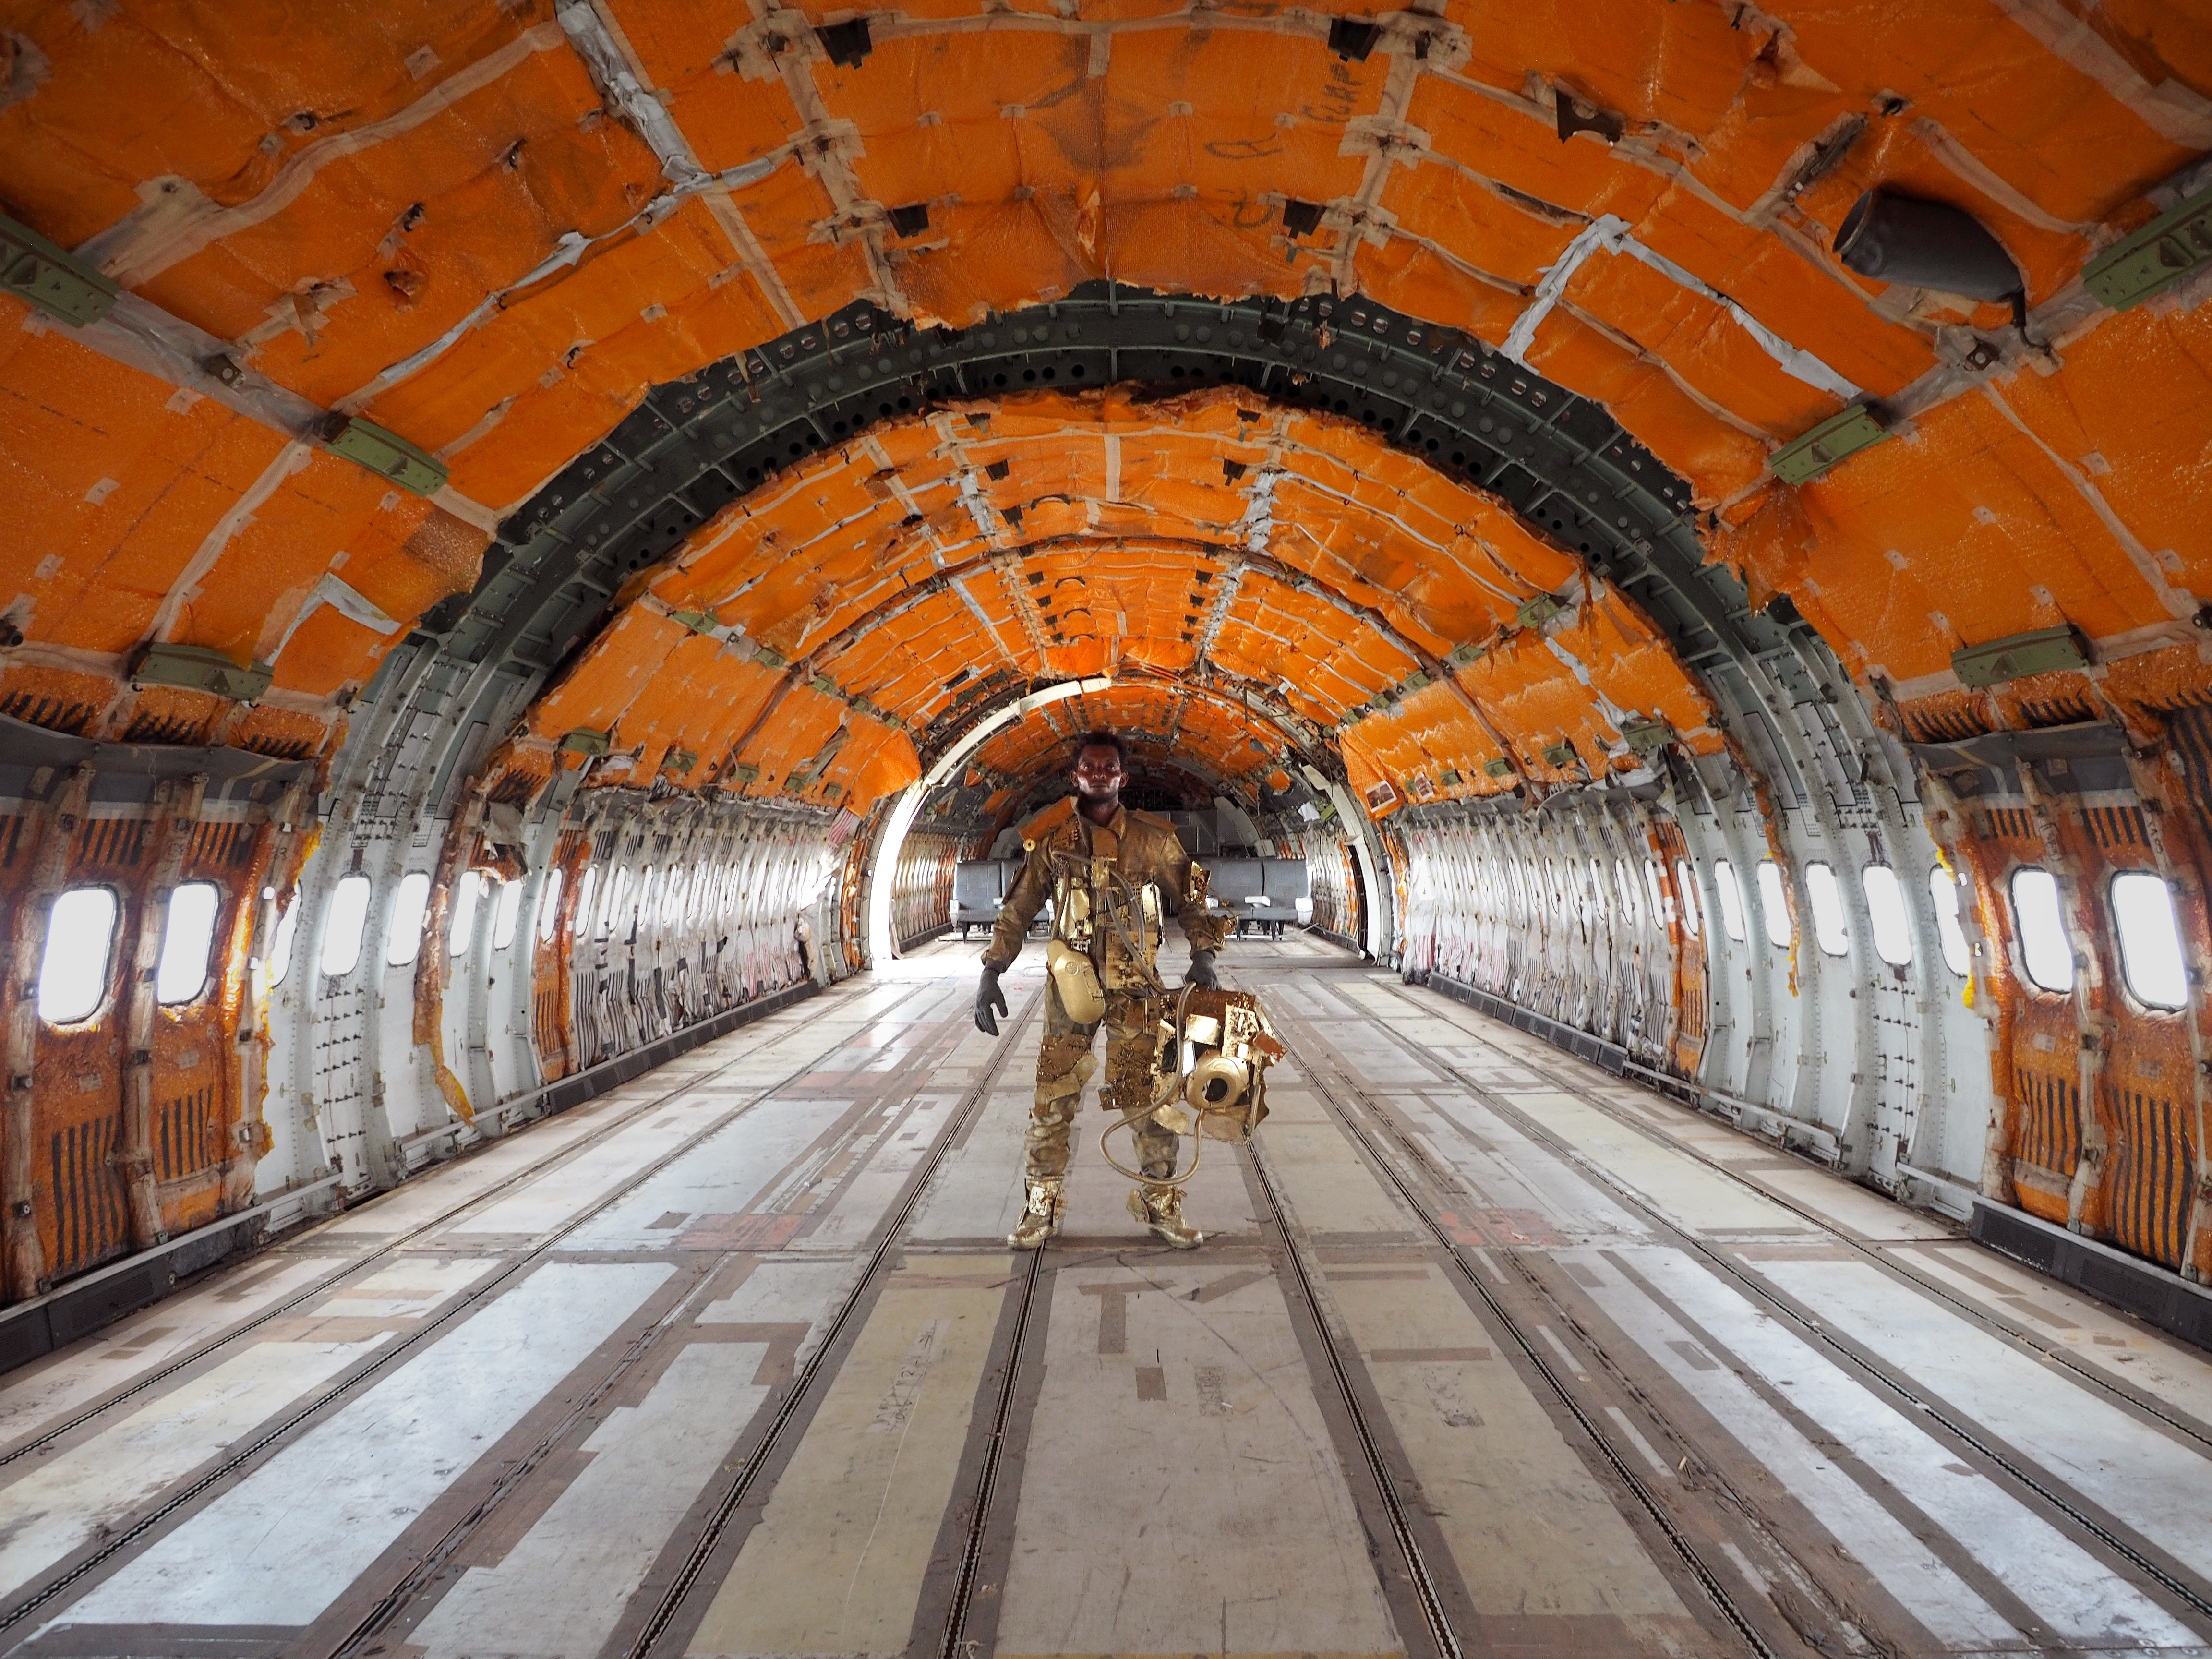 In a gold metallic makeshift space suit holding an astronaut helmet, a Black man is standing in the middle of an empty cargo plane of receding orange arches.